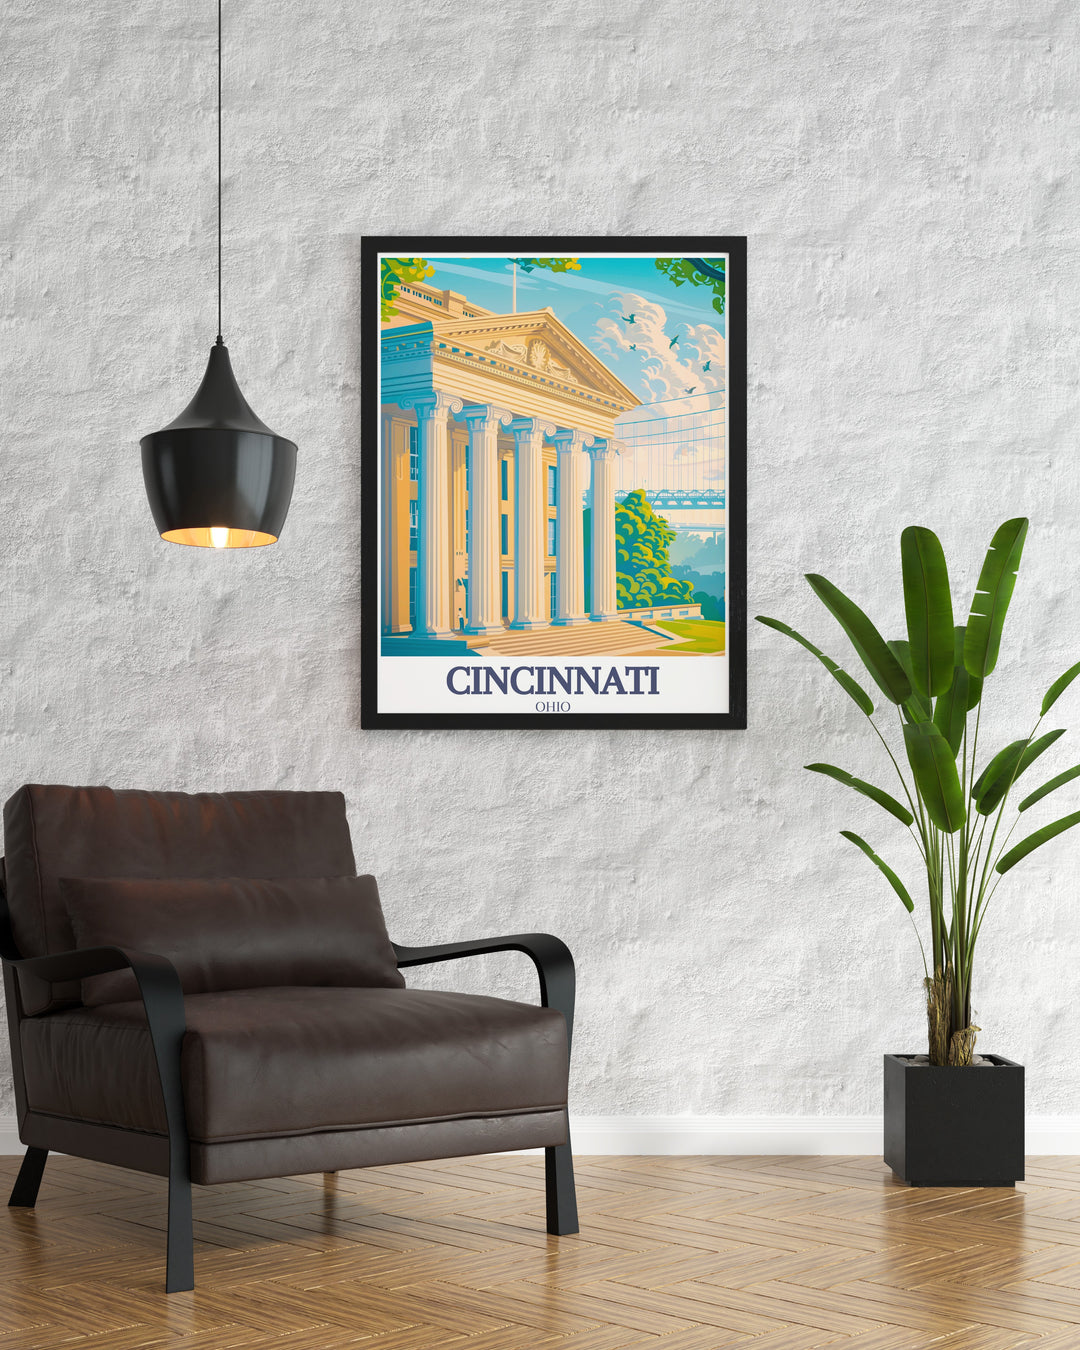 Stunning Cincinnati Art Museum Roebling Suspension Bridge wall art that celebrates the rich heritage and architectural marvels of Cincinnati making it a perfect addition to your collection of personalized gifts